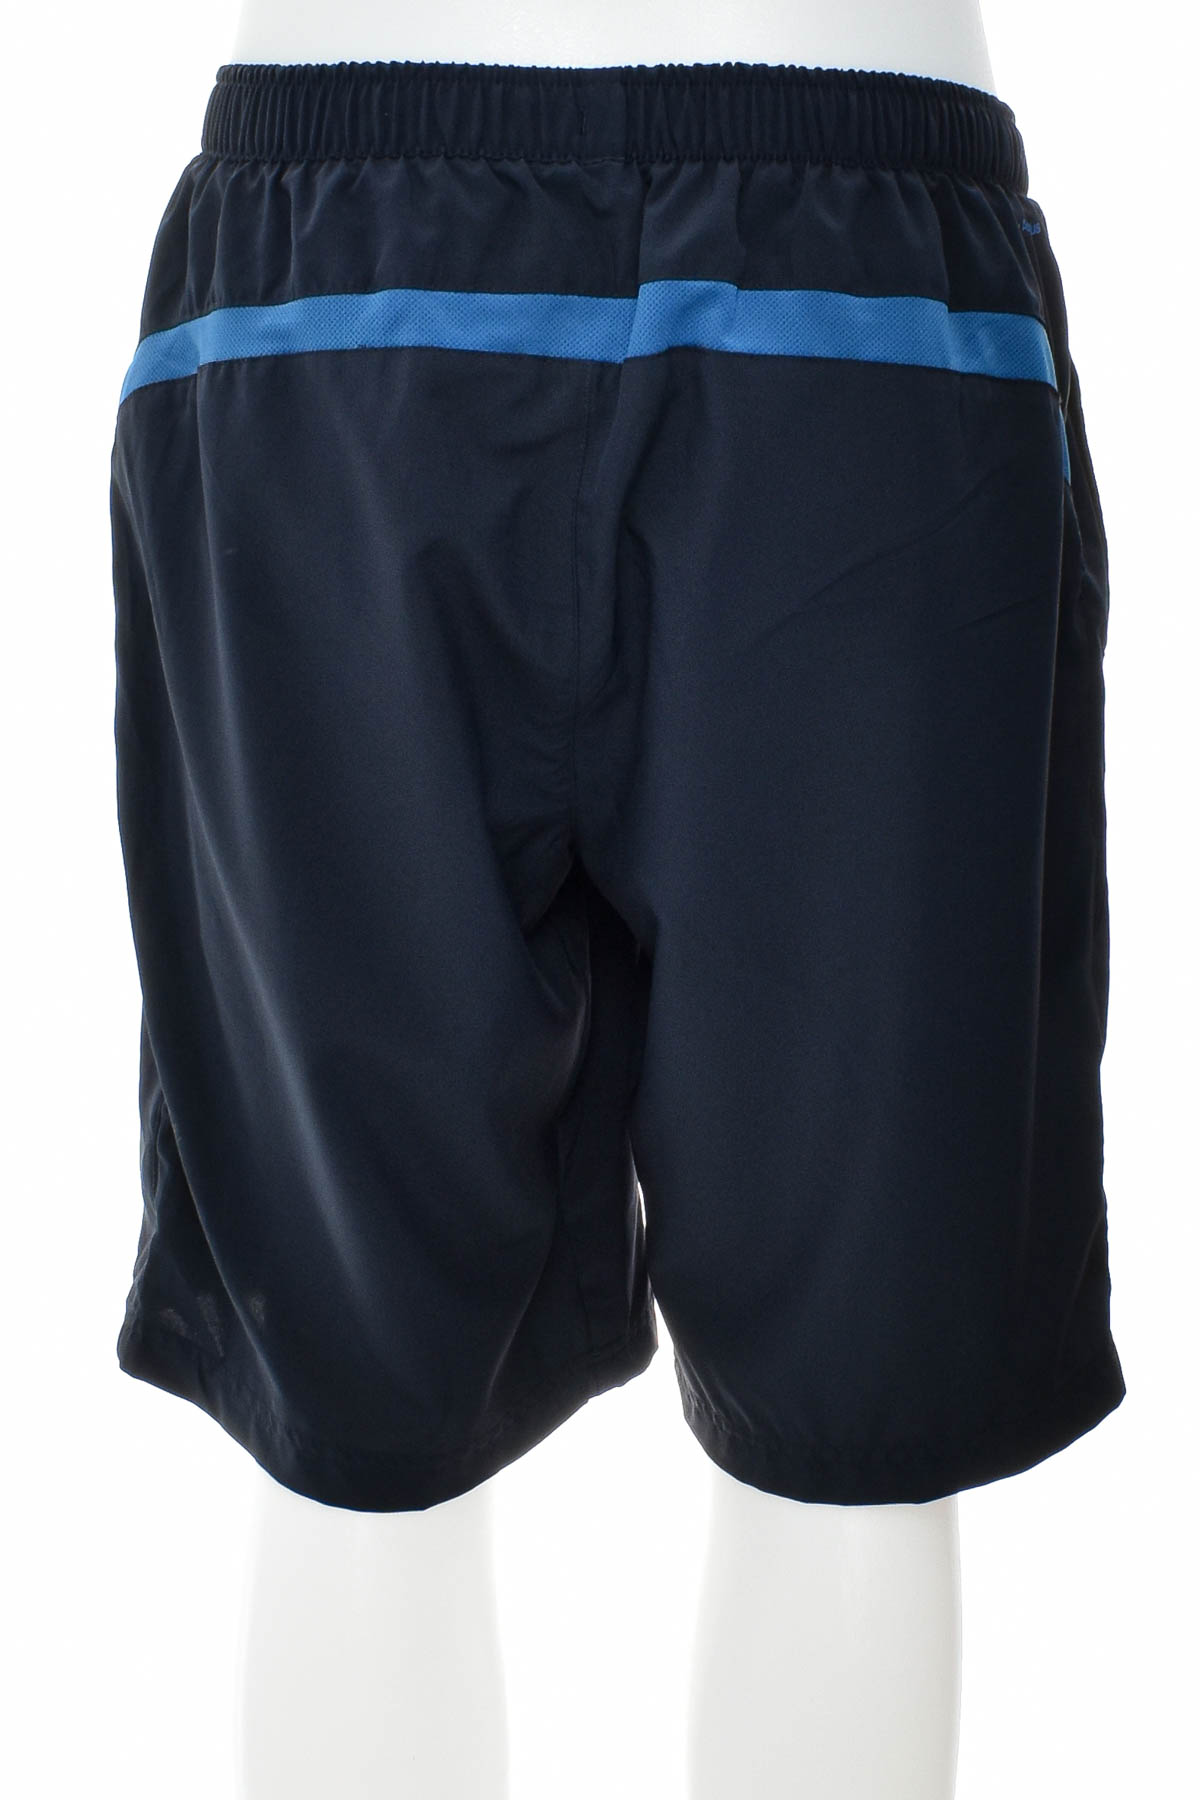 Men's shorts - Active LIMITED by Tchibo - 1